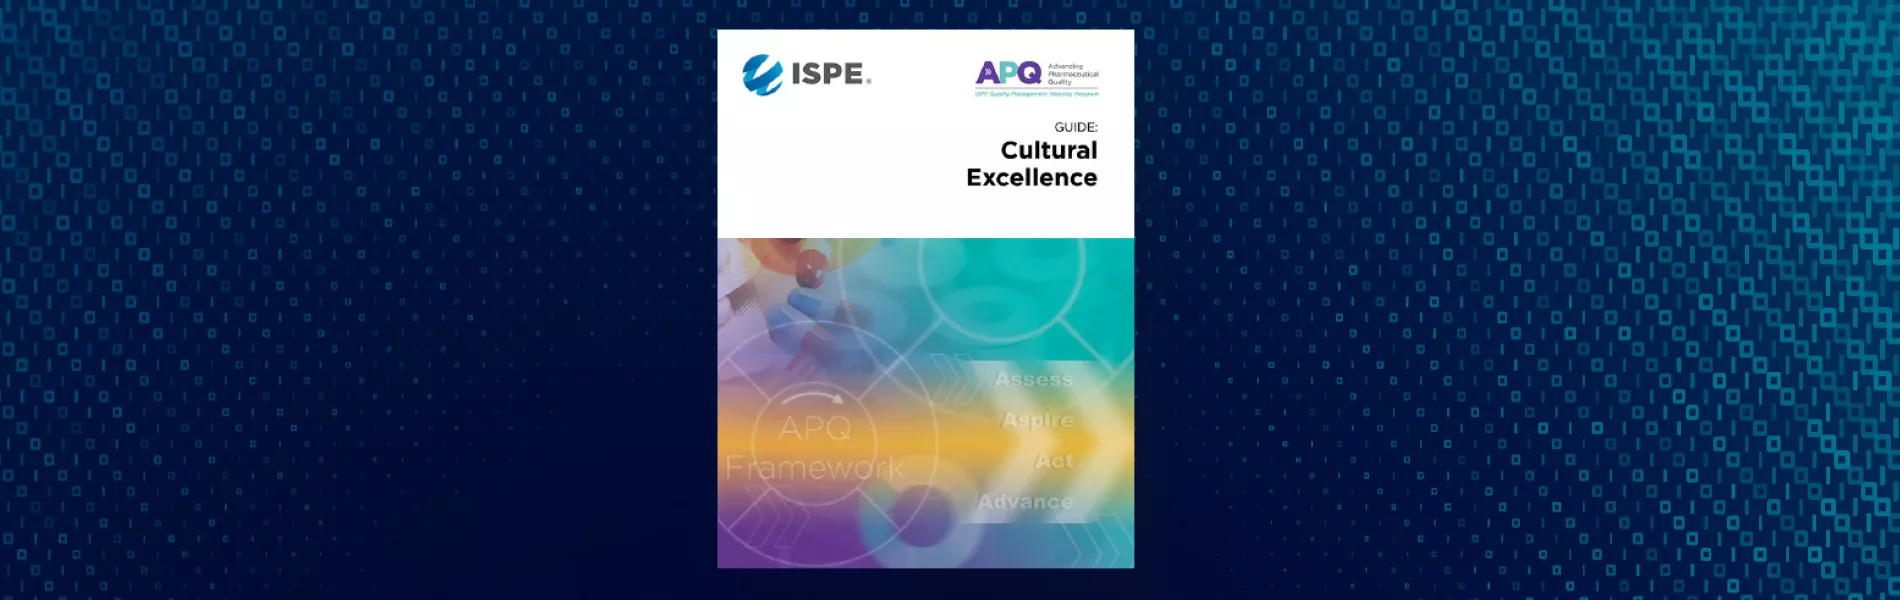 ISPE Briefs: New Guide Promotes Cultural Excellence